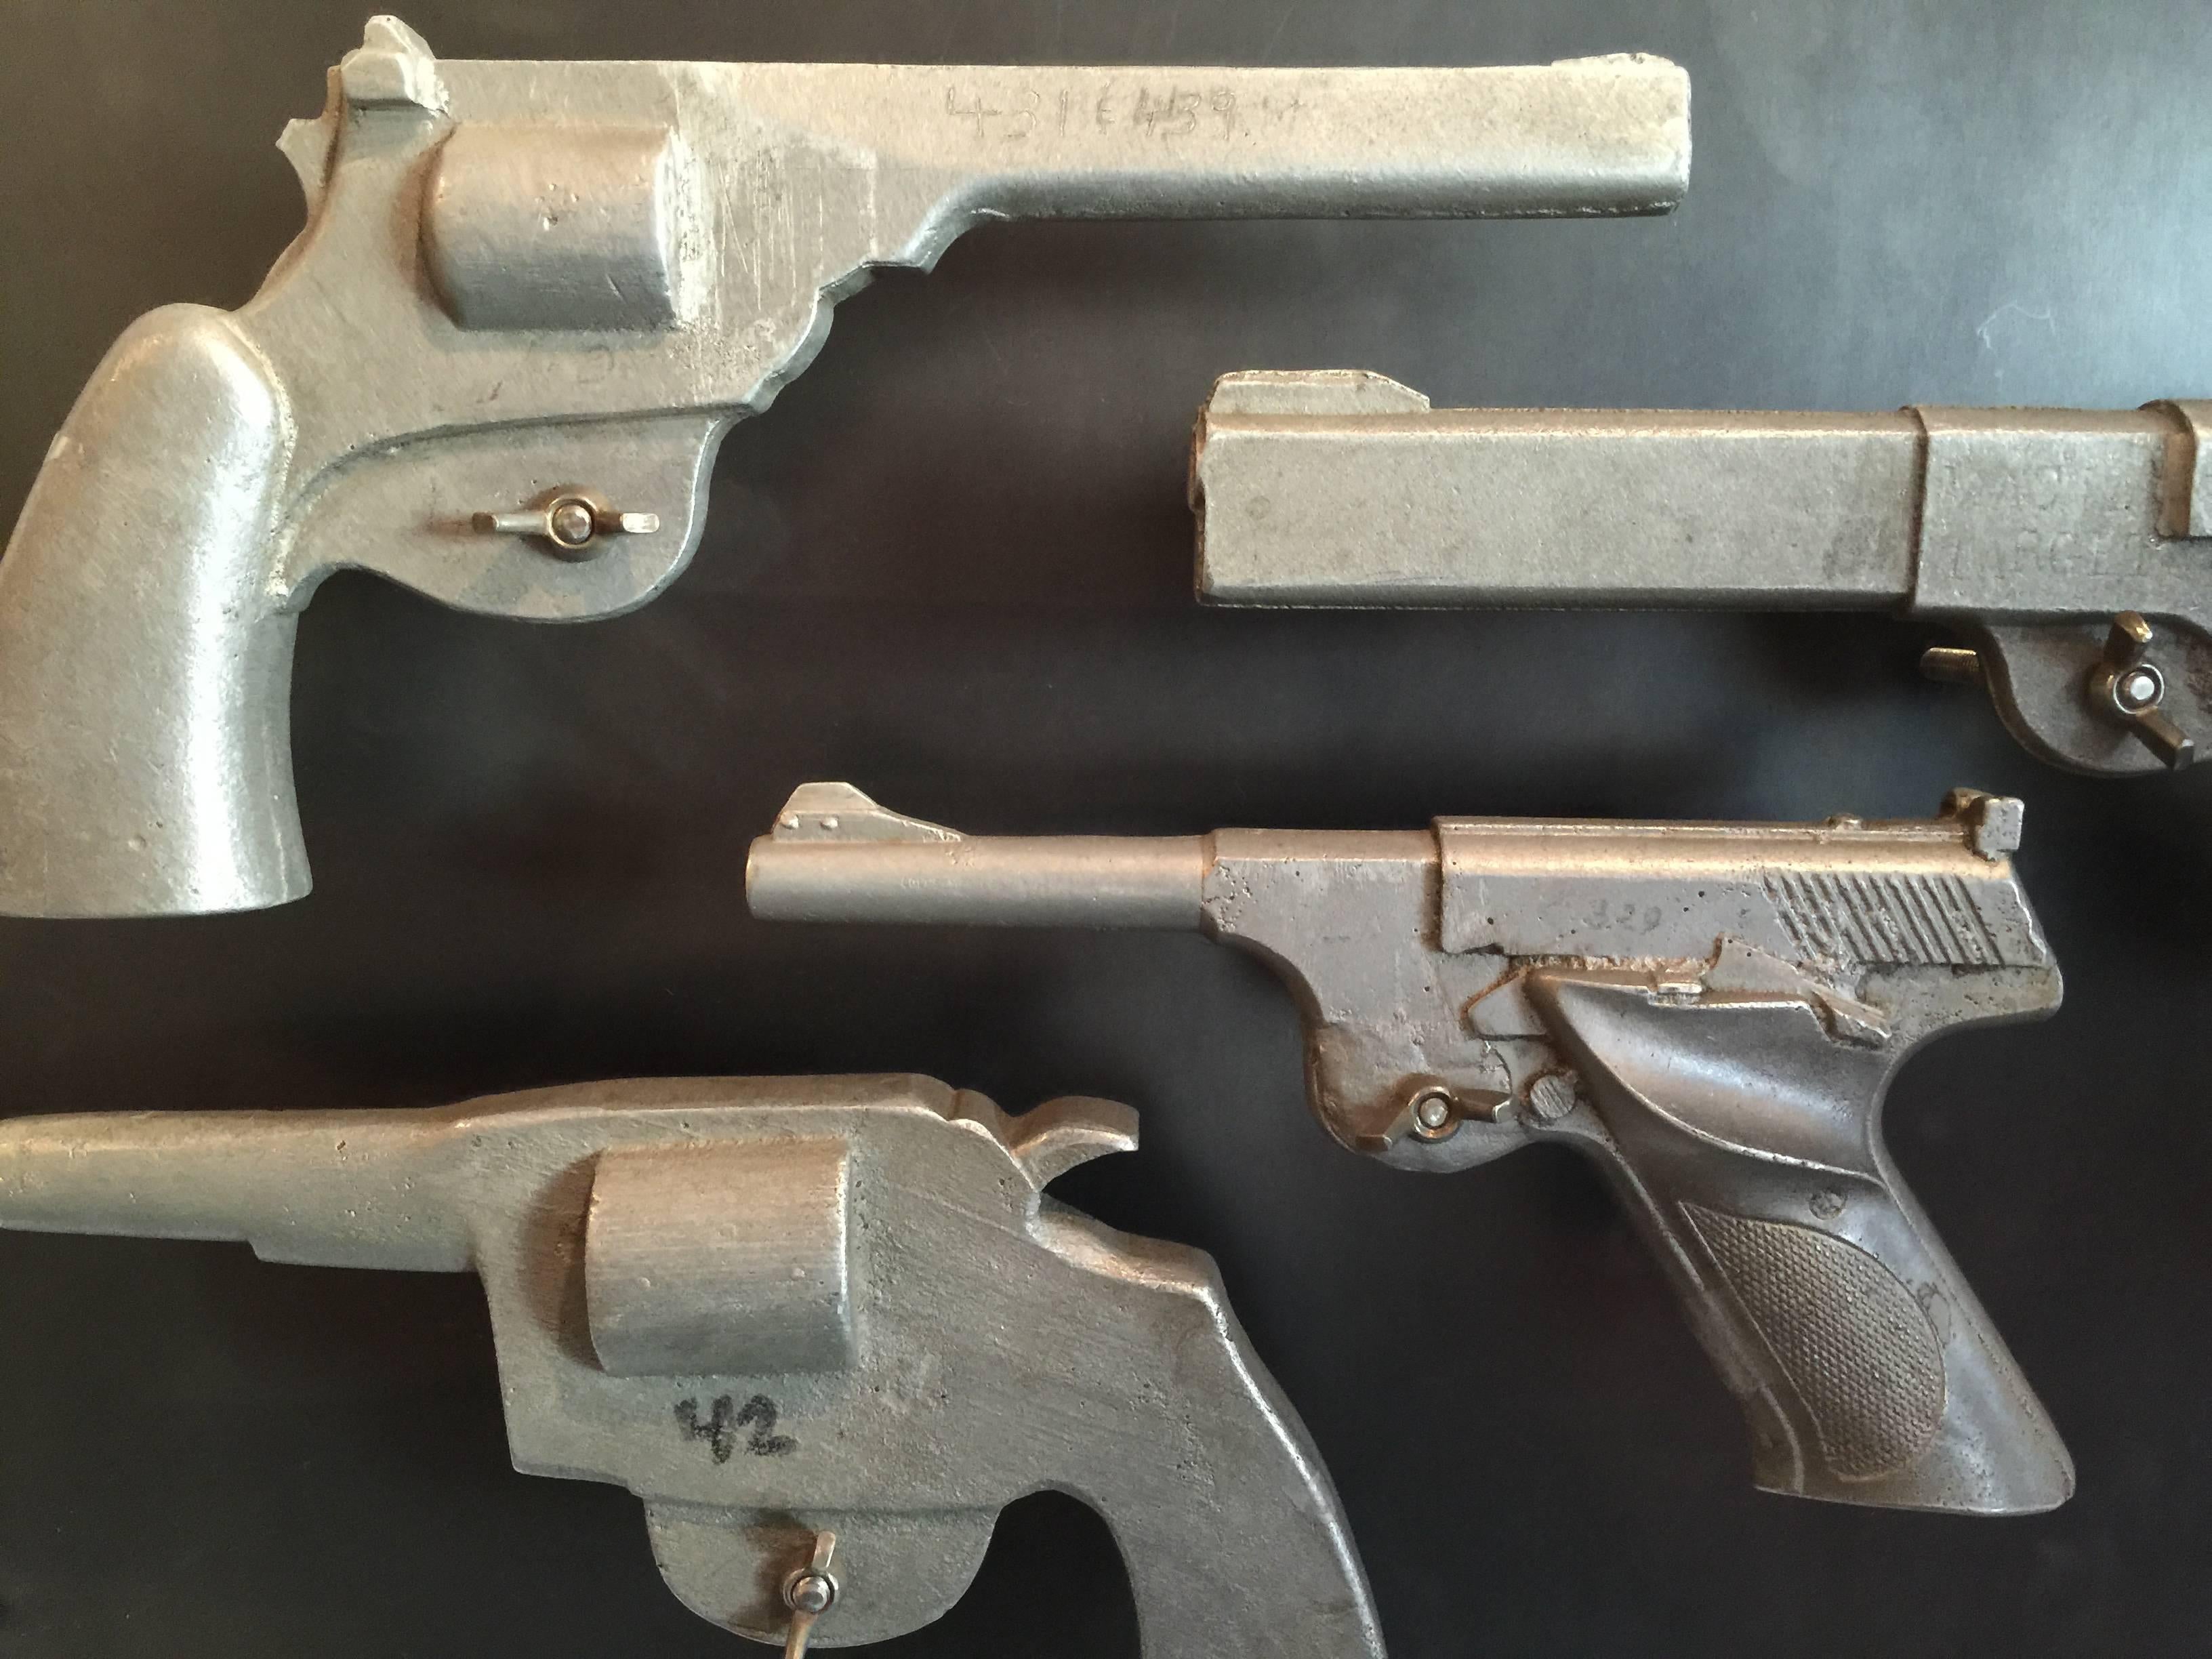 Four cast aluminum pistols which were originally used as weights for molding leather holsters have been mounted onto a steel plate. Each are removable by simply unscrewing the wing nut.